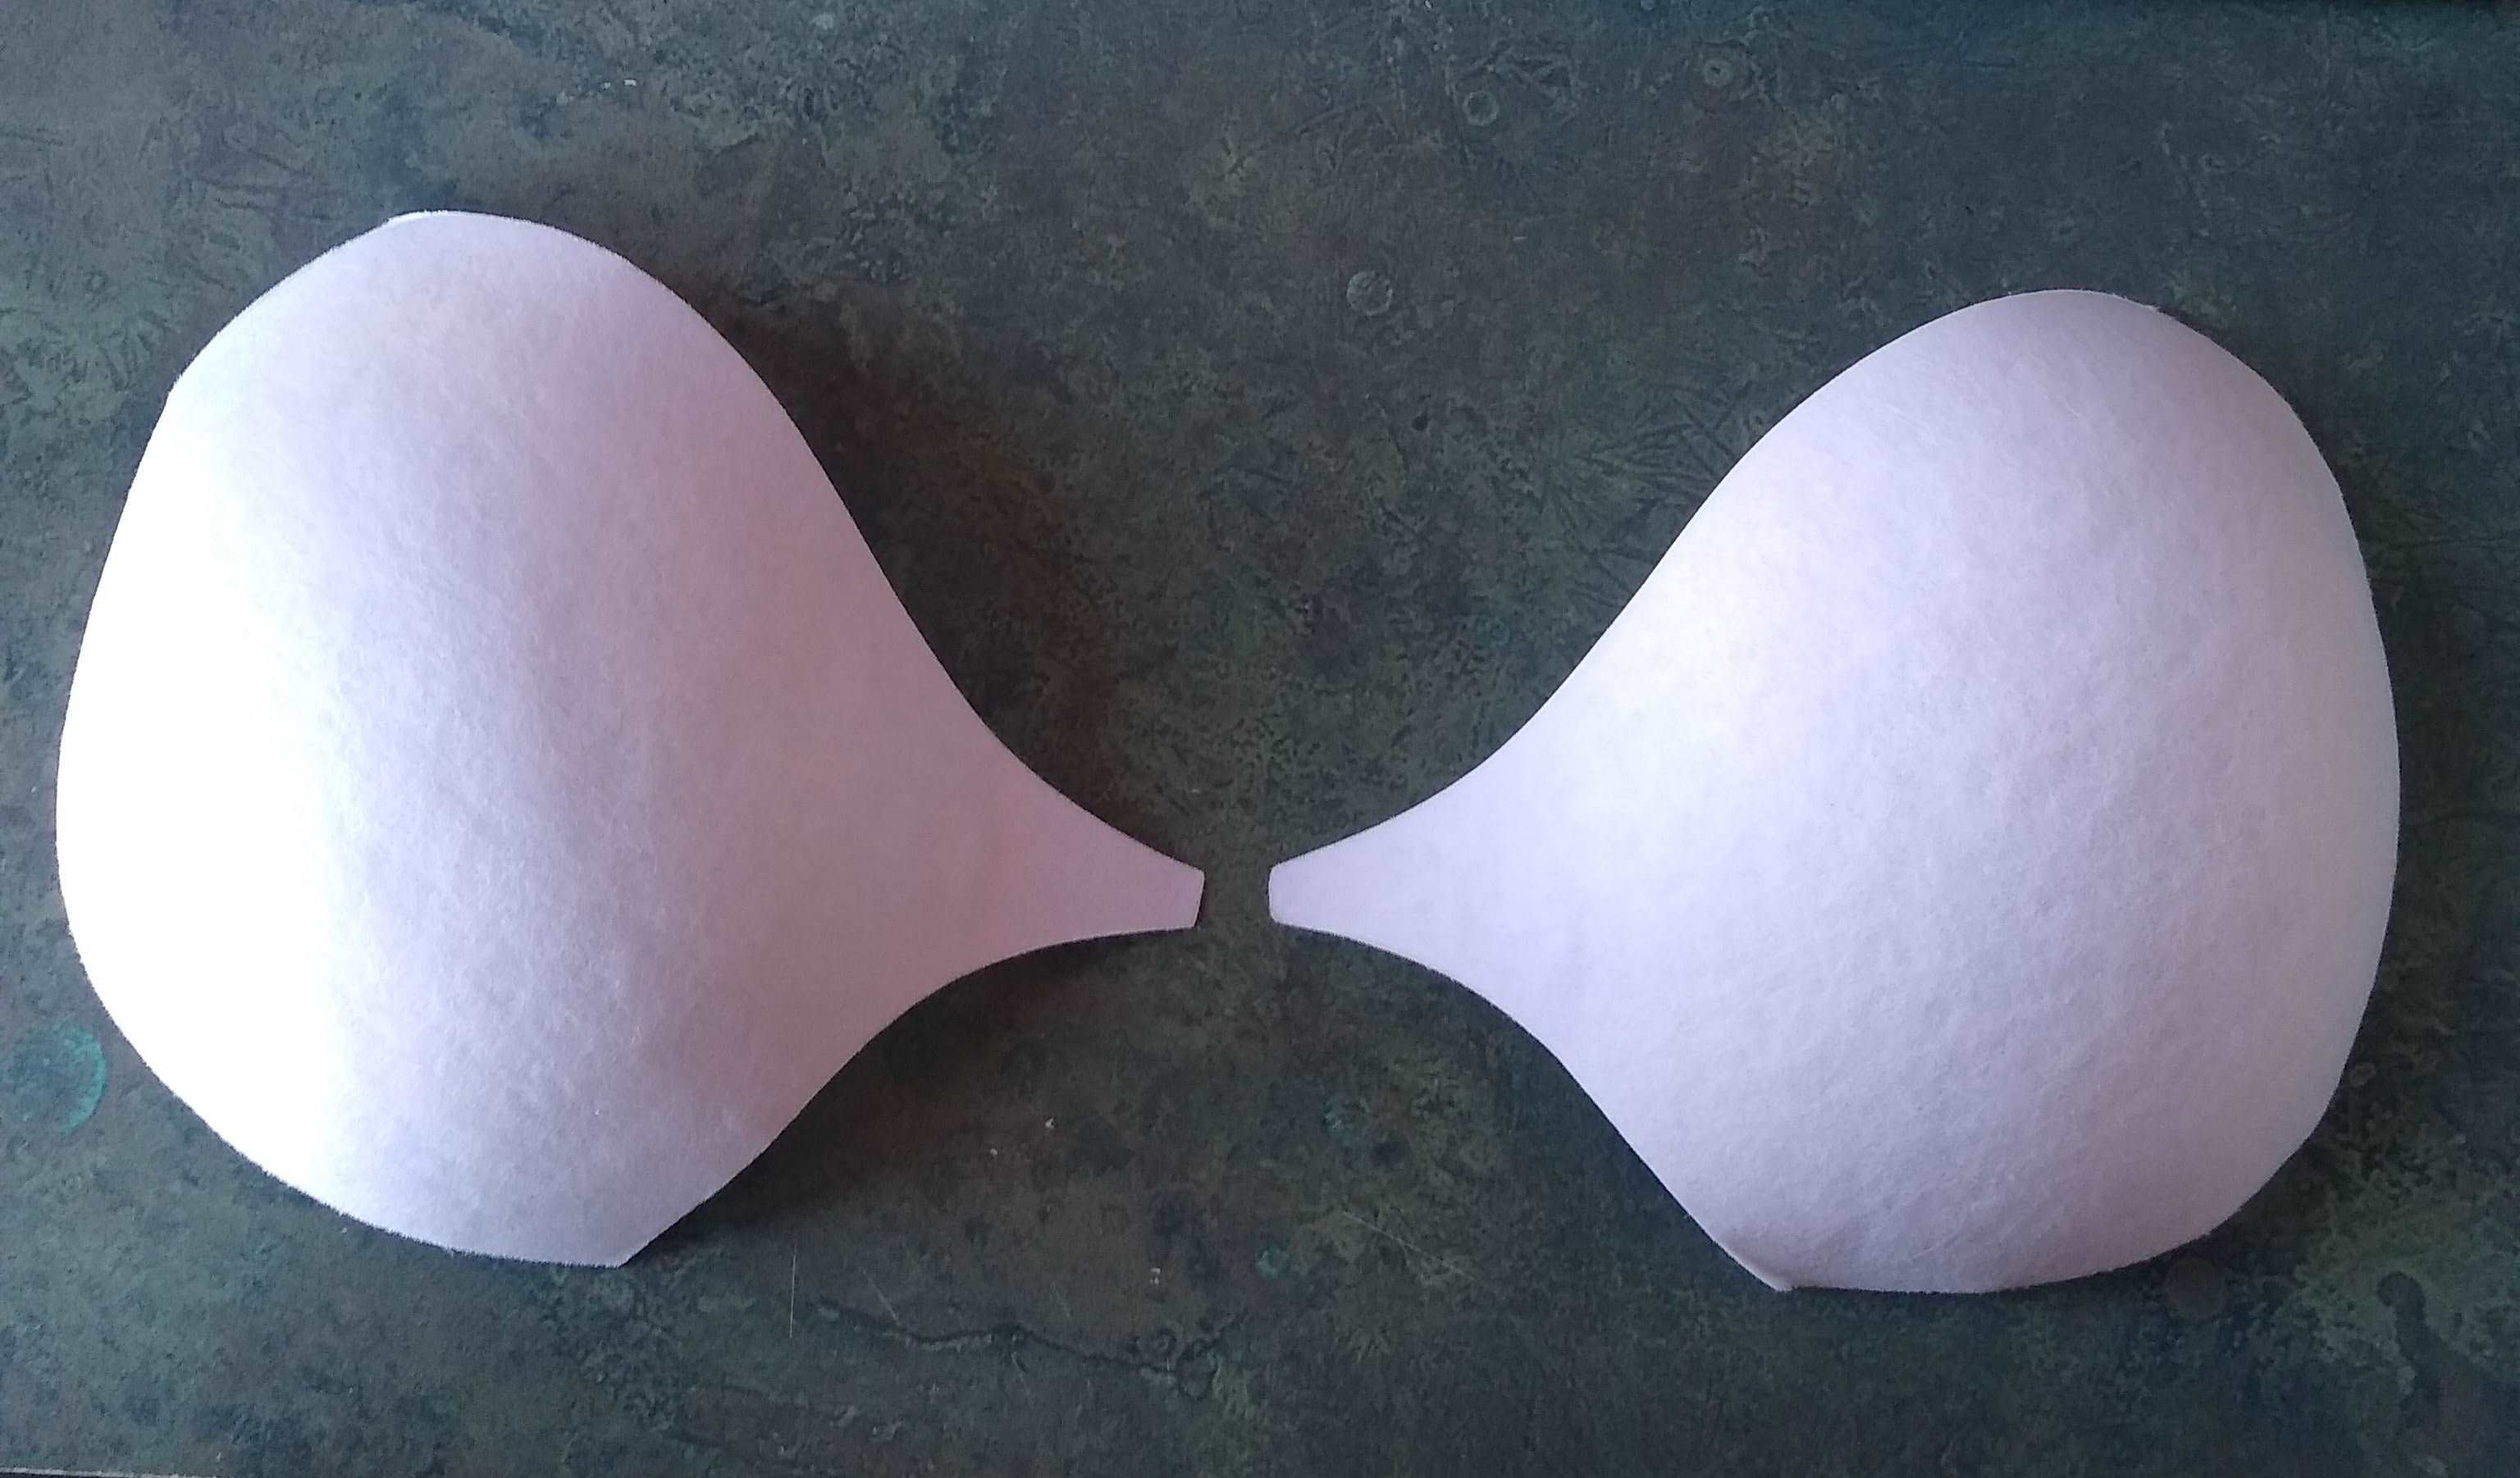 1709 One Piece Foam Cup Bra Cup for Ladies - China Bra Cup and Bra